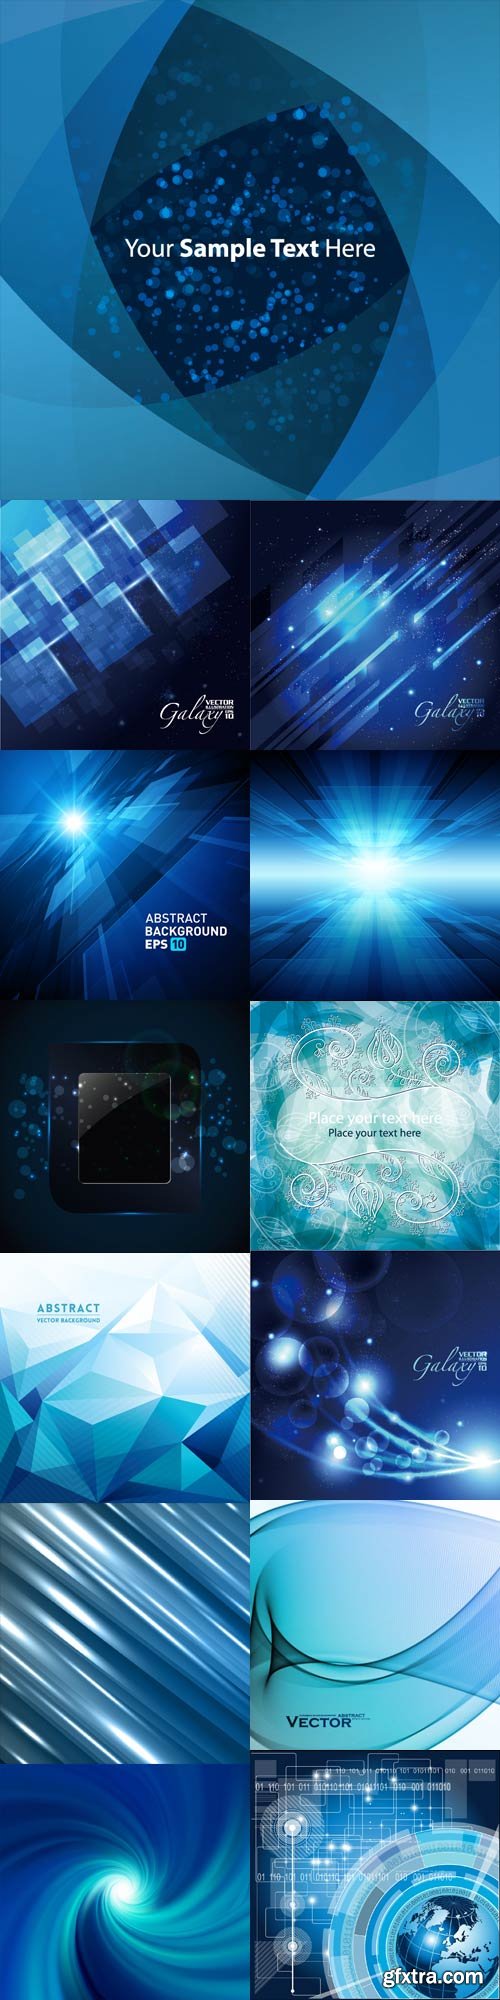 Blue abstract backgrounds vector - 15